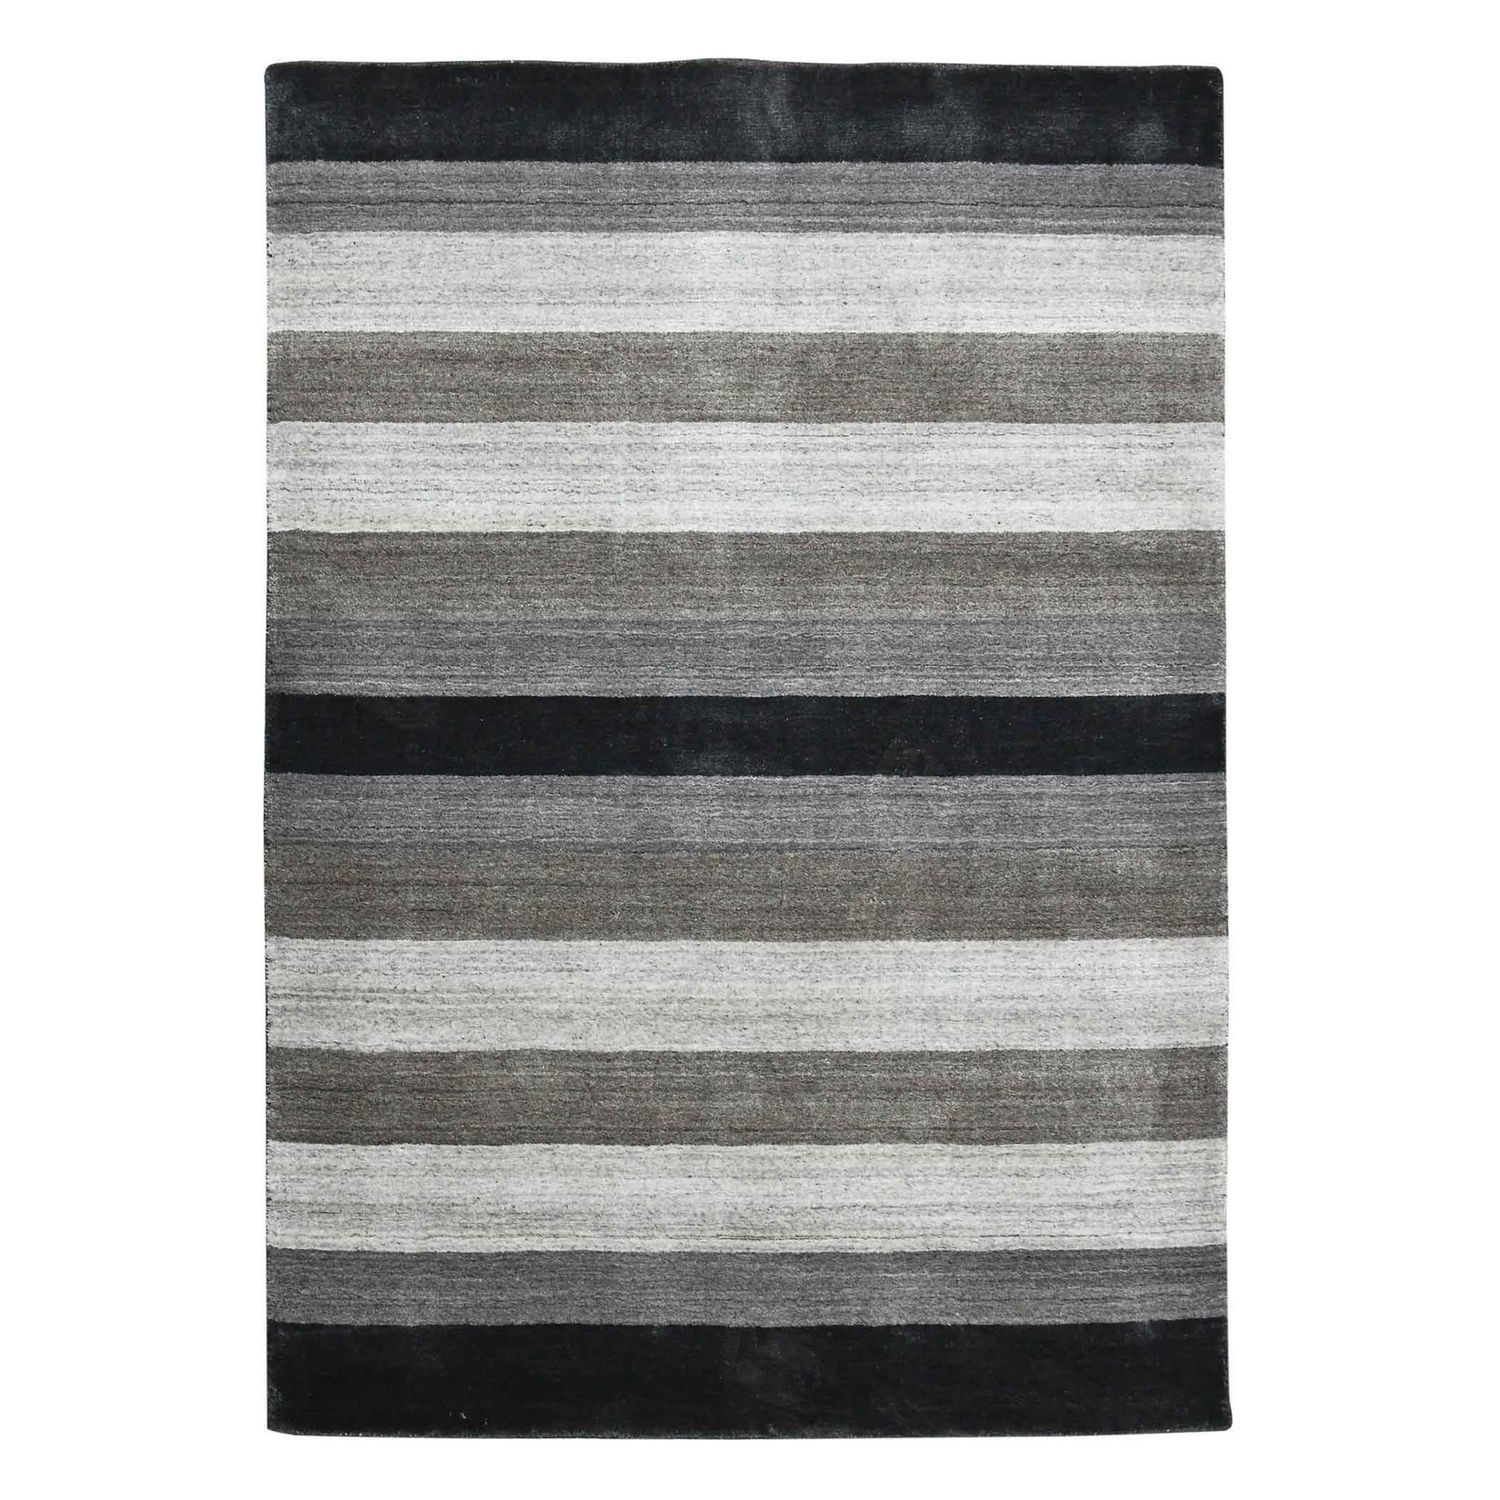 Amer Area Rugs BLN-15 Blend - Gray/Ivory - Vertical View